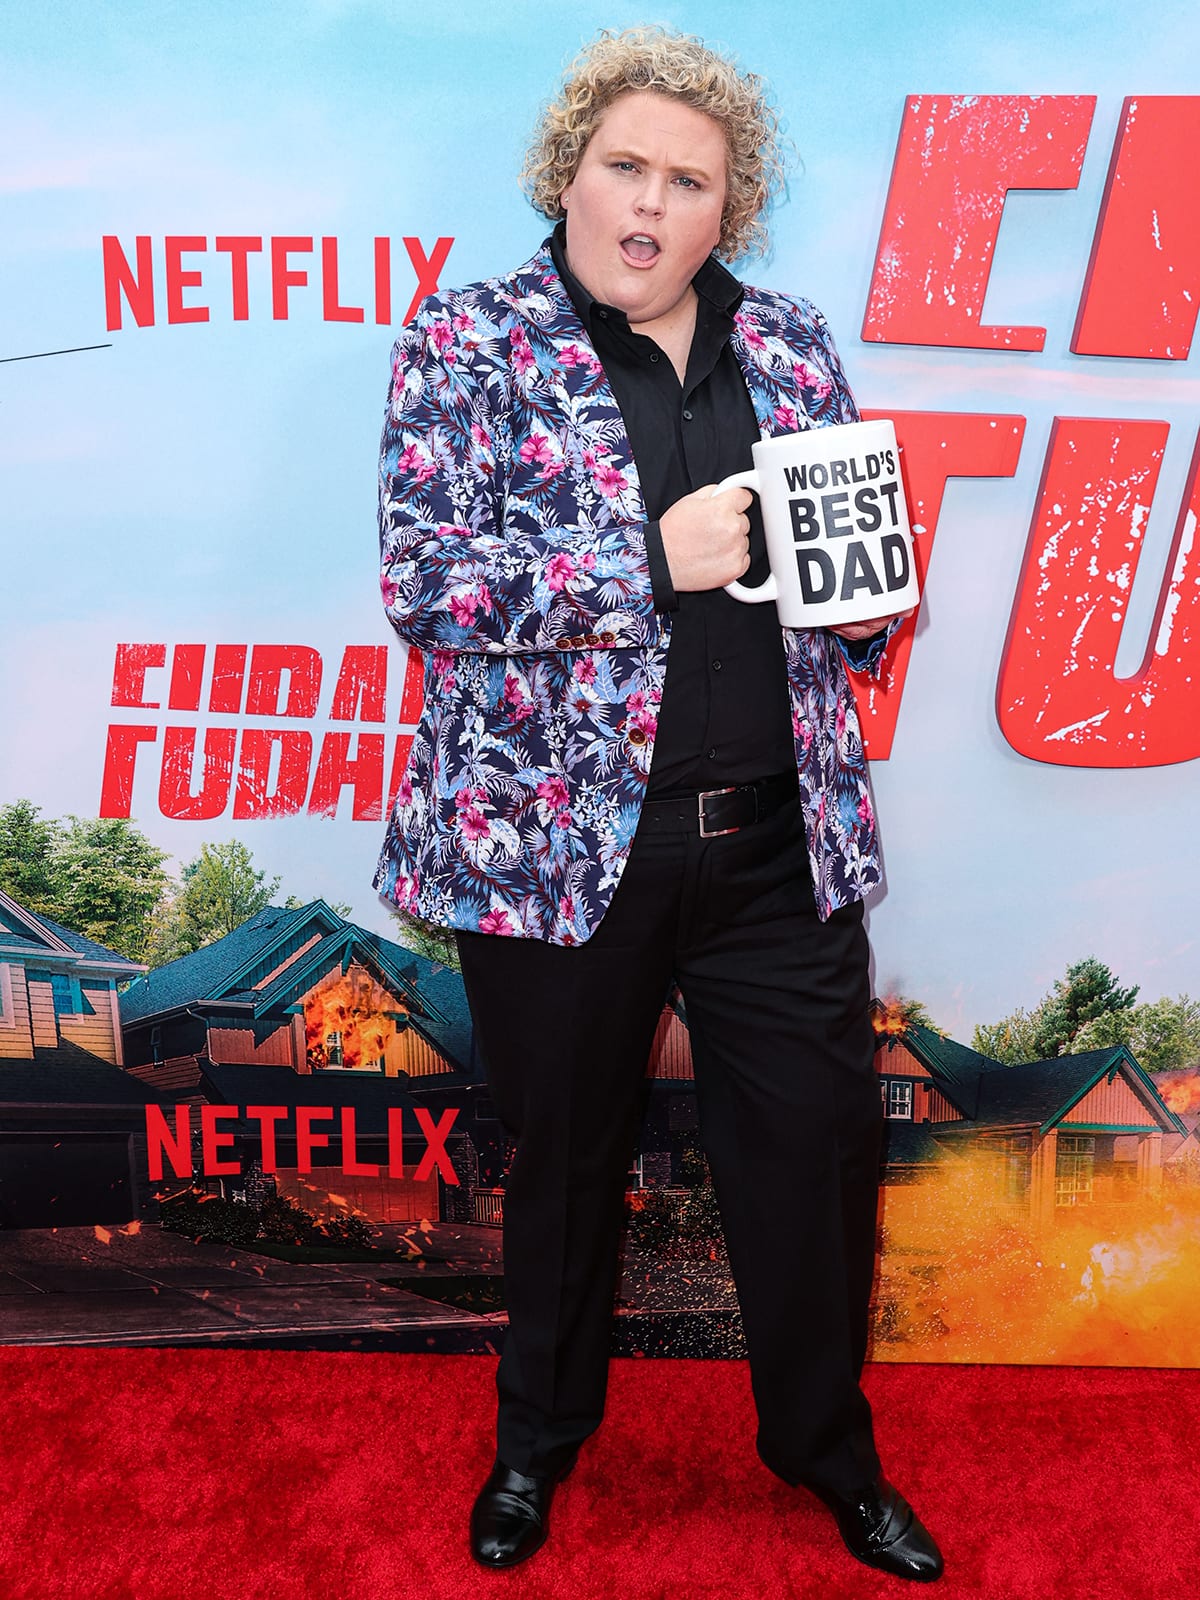 Stand-up comedian Fortune Feimster is taller than the average American woman at 5 feet and 8 inches